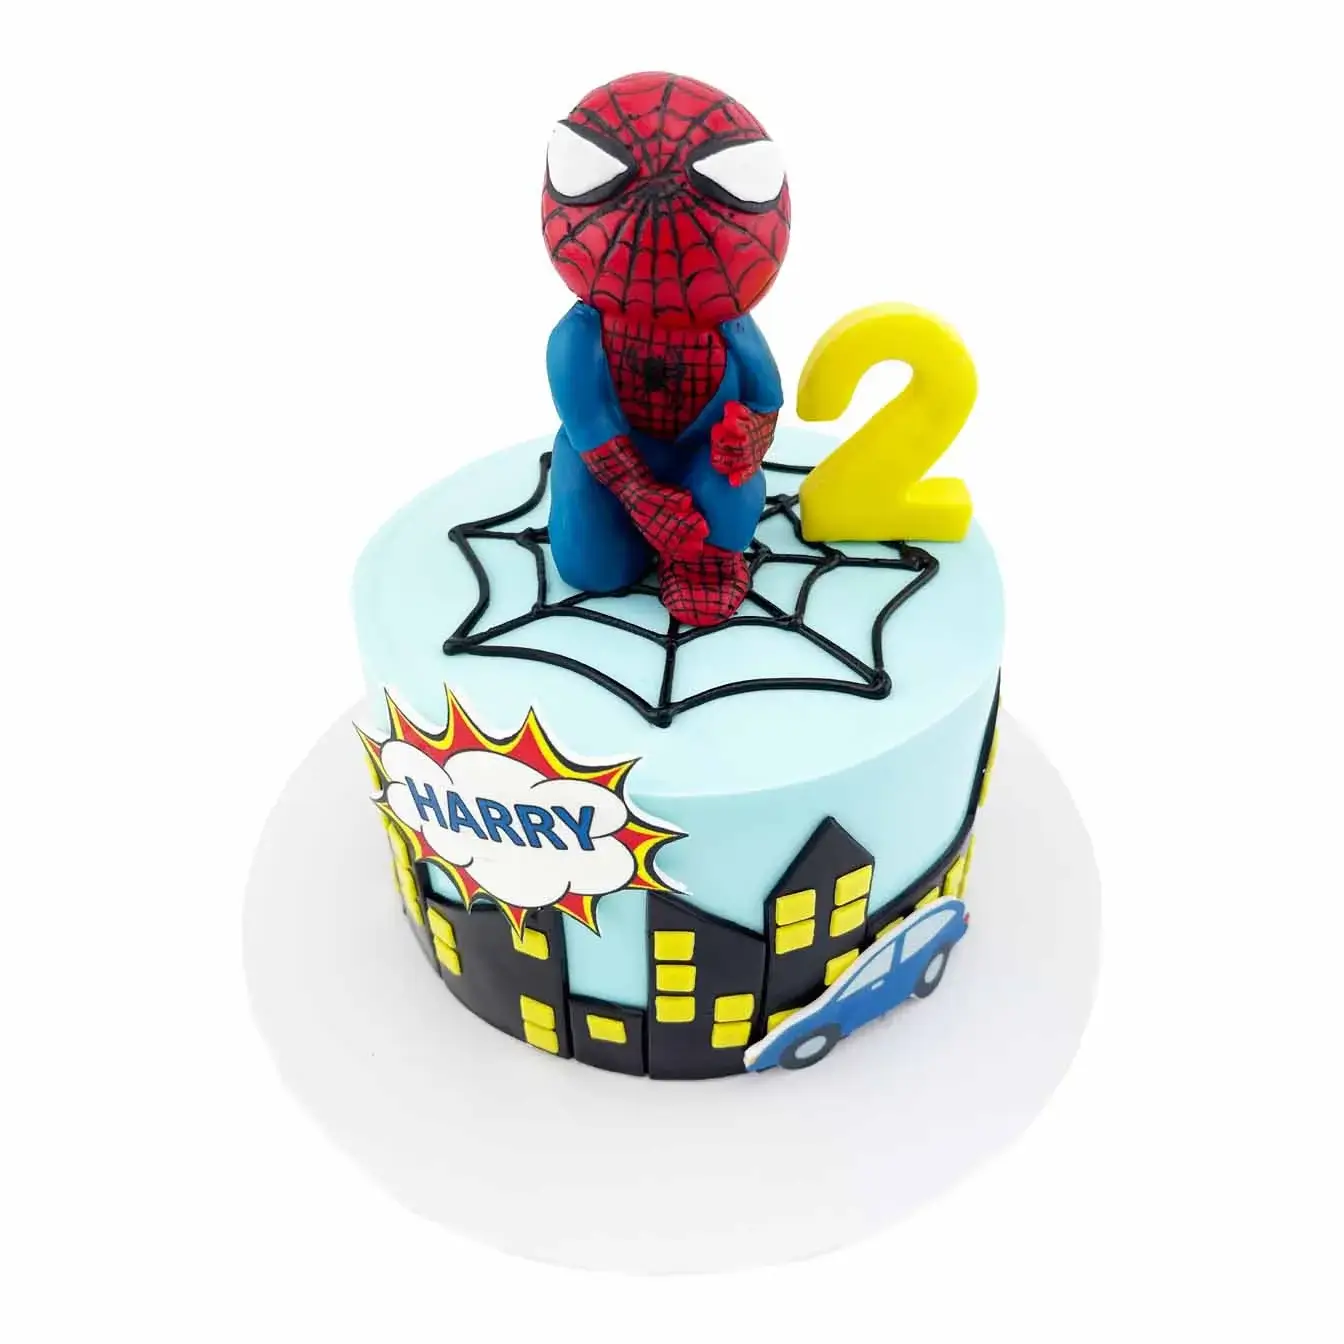 Our Spiderman cake with city skyline design features a smooth blue fondant cake with a black city skyline made of fondant. Topped with a cartoon Spiderman figurine, it's perfect for any Spiderman fan's celebration!